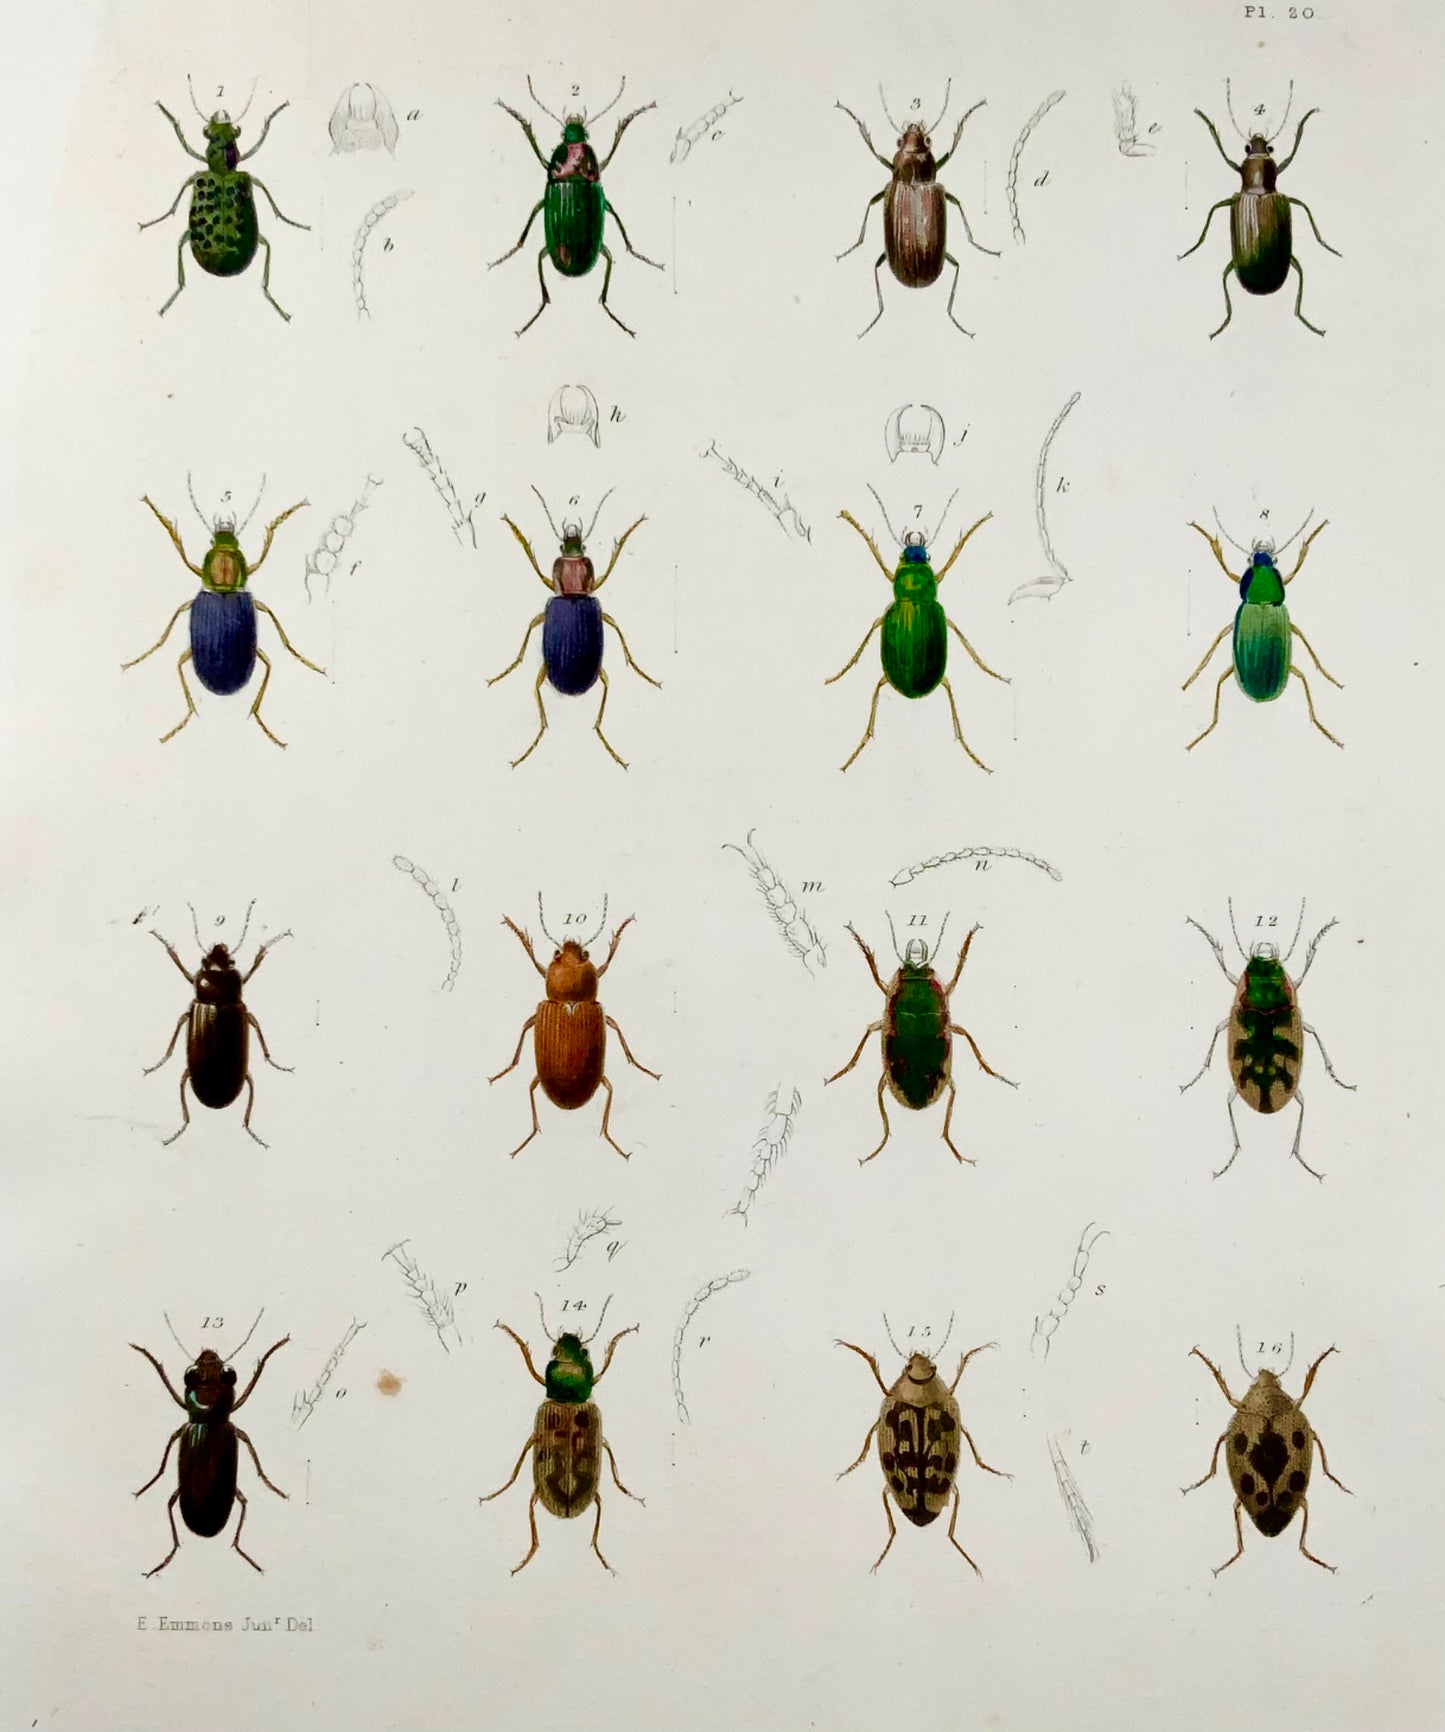 1854 New York Beetles, Pease lith; Emmons, large hand coloured stone lithograph